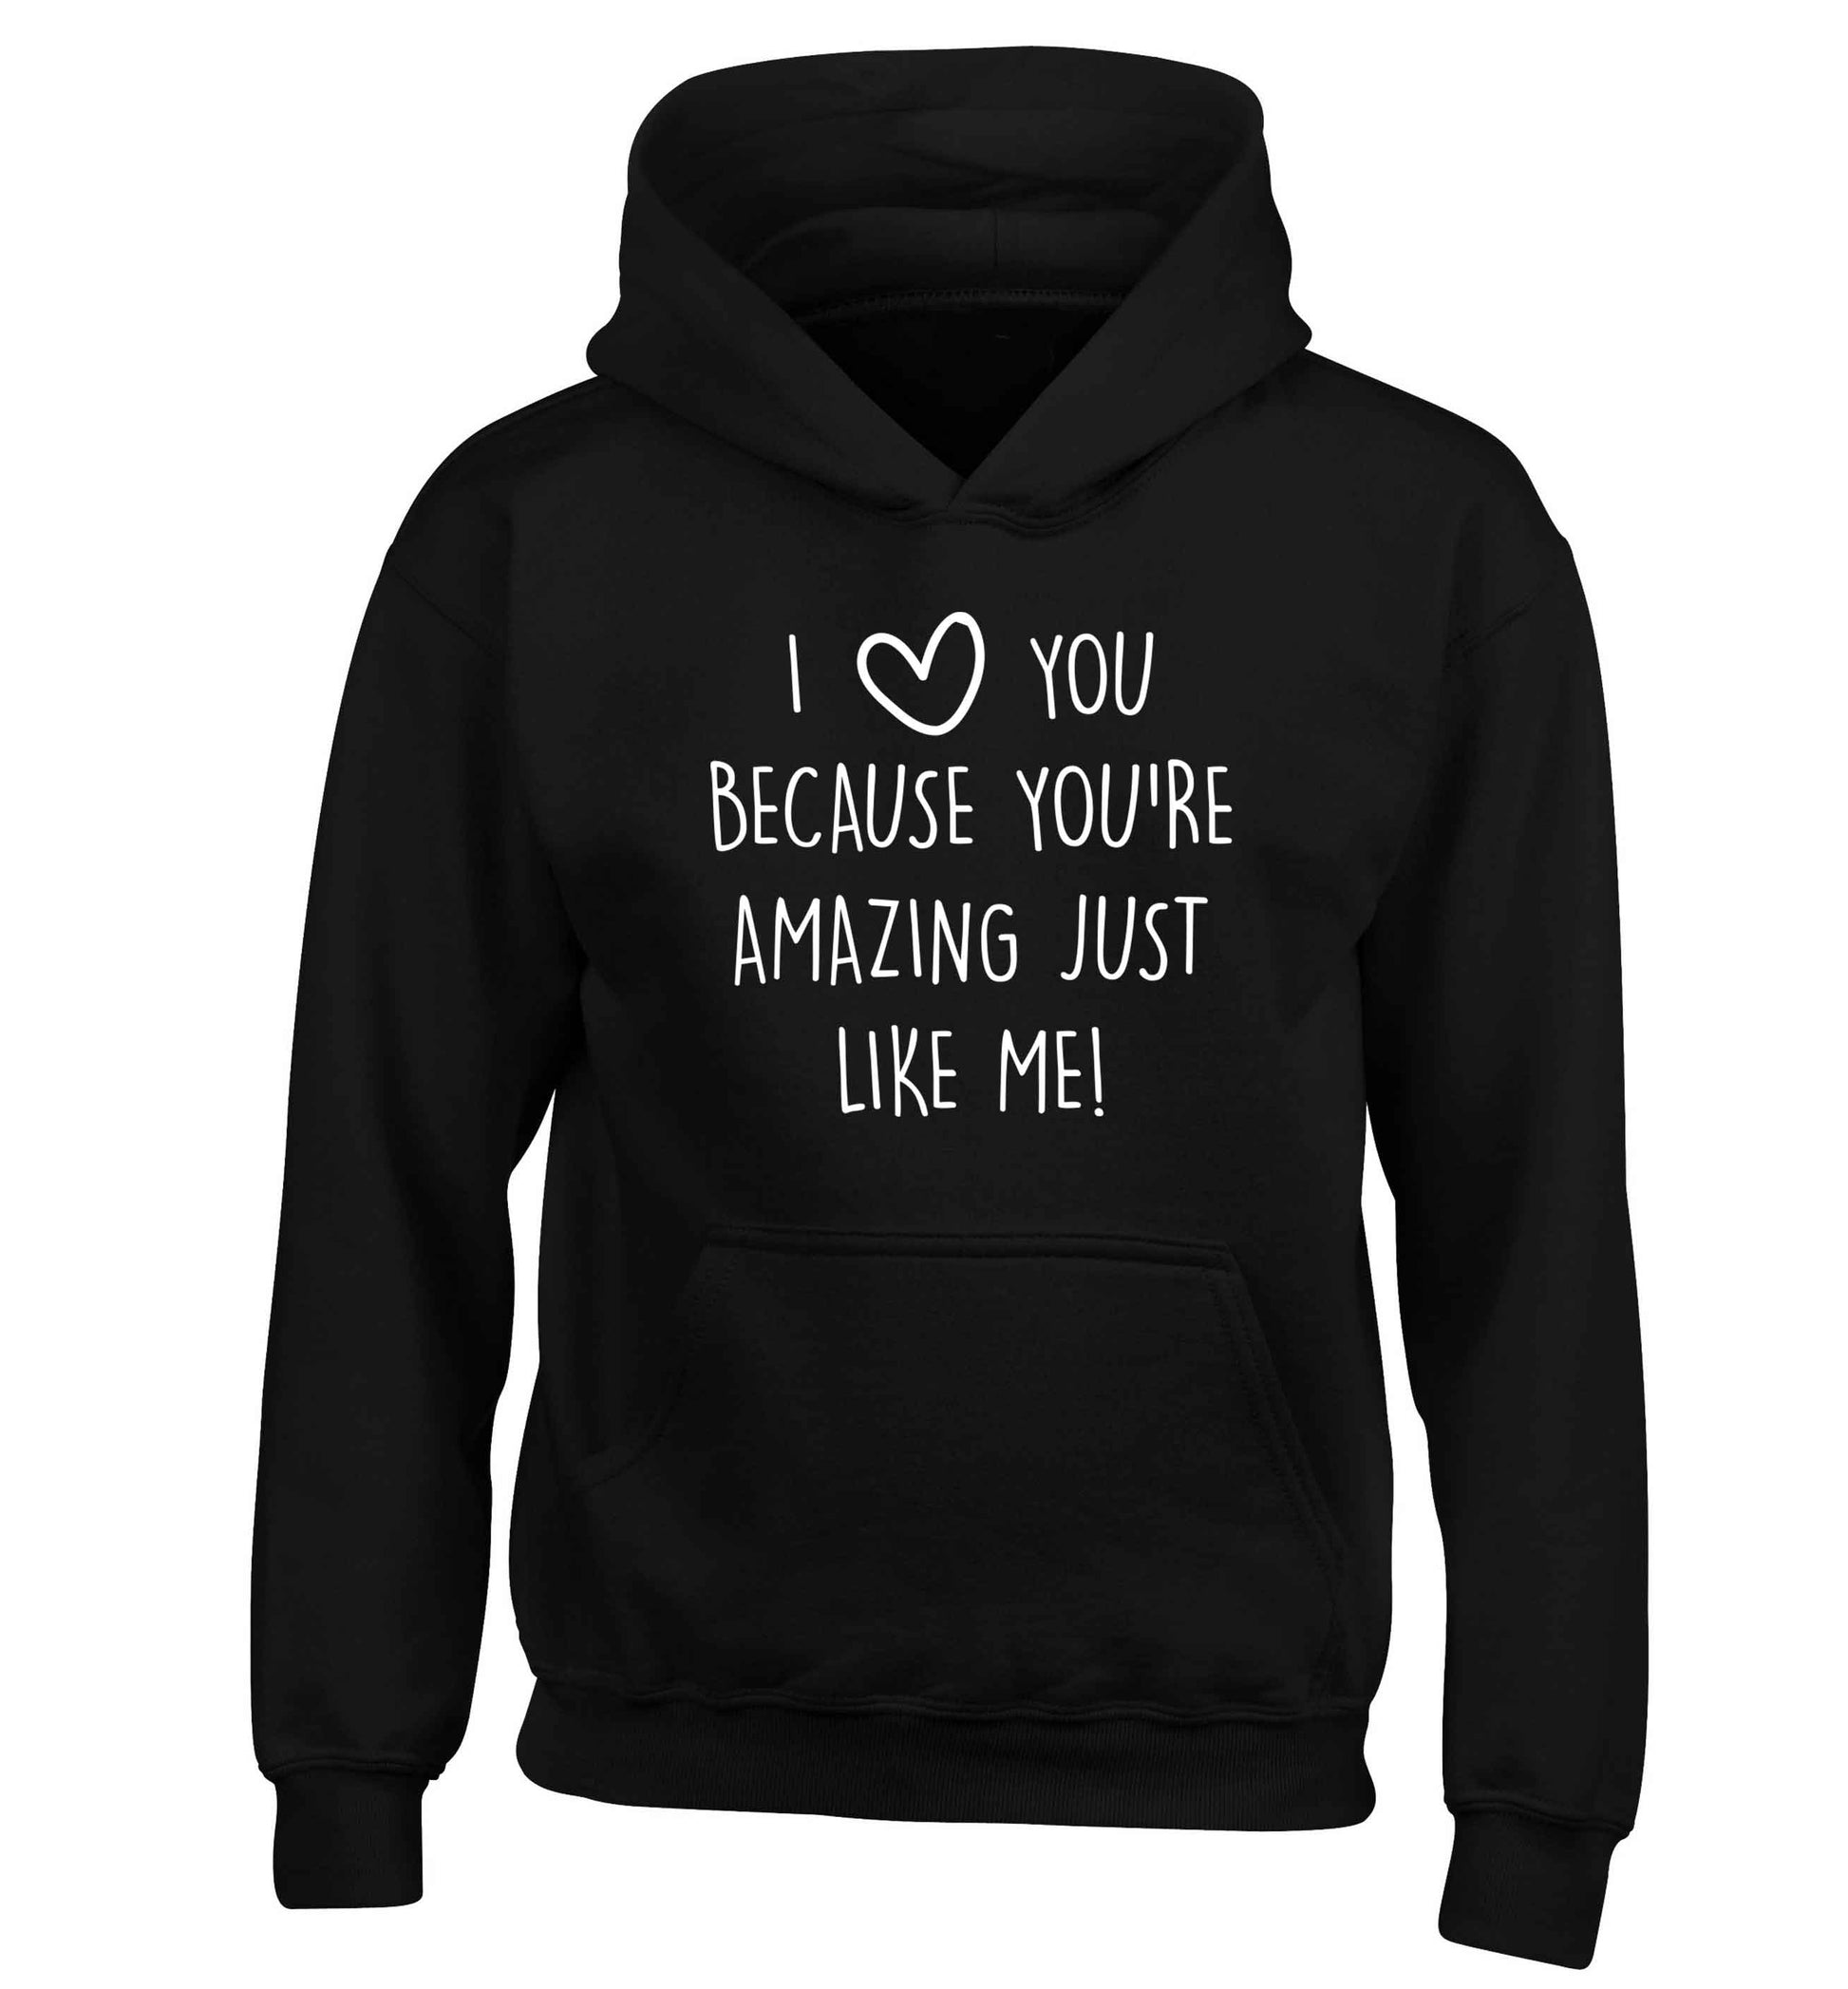 I love you because you're amazing just like me children's black hoodie 12-13 Years